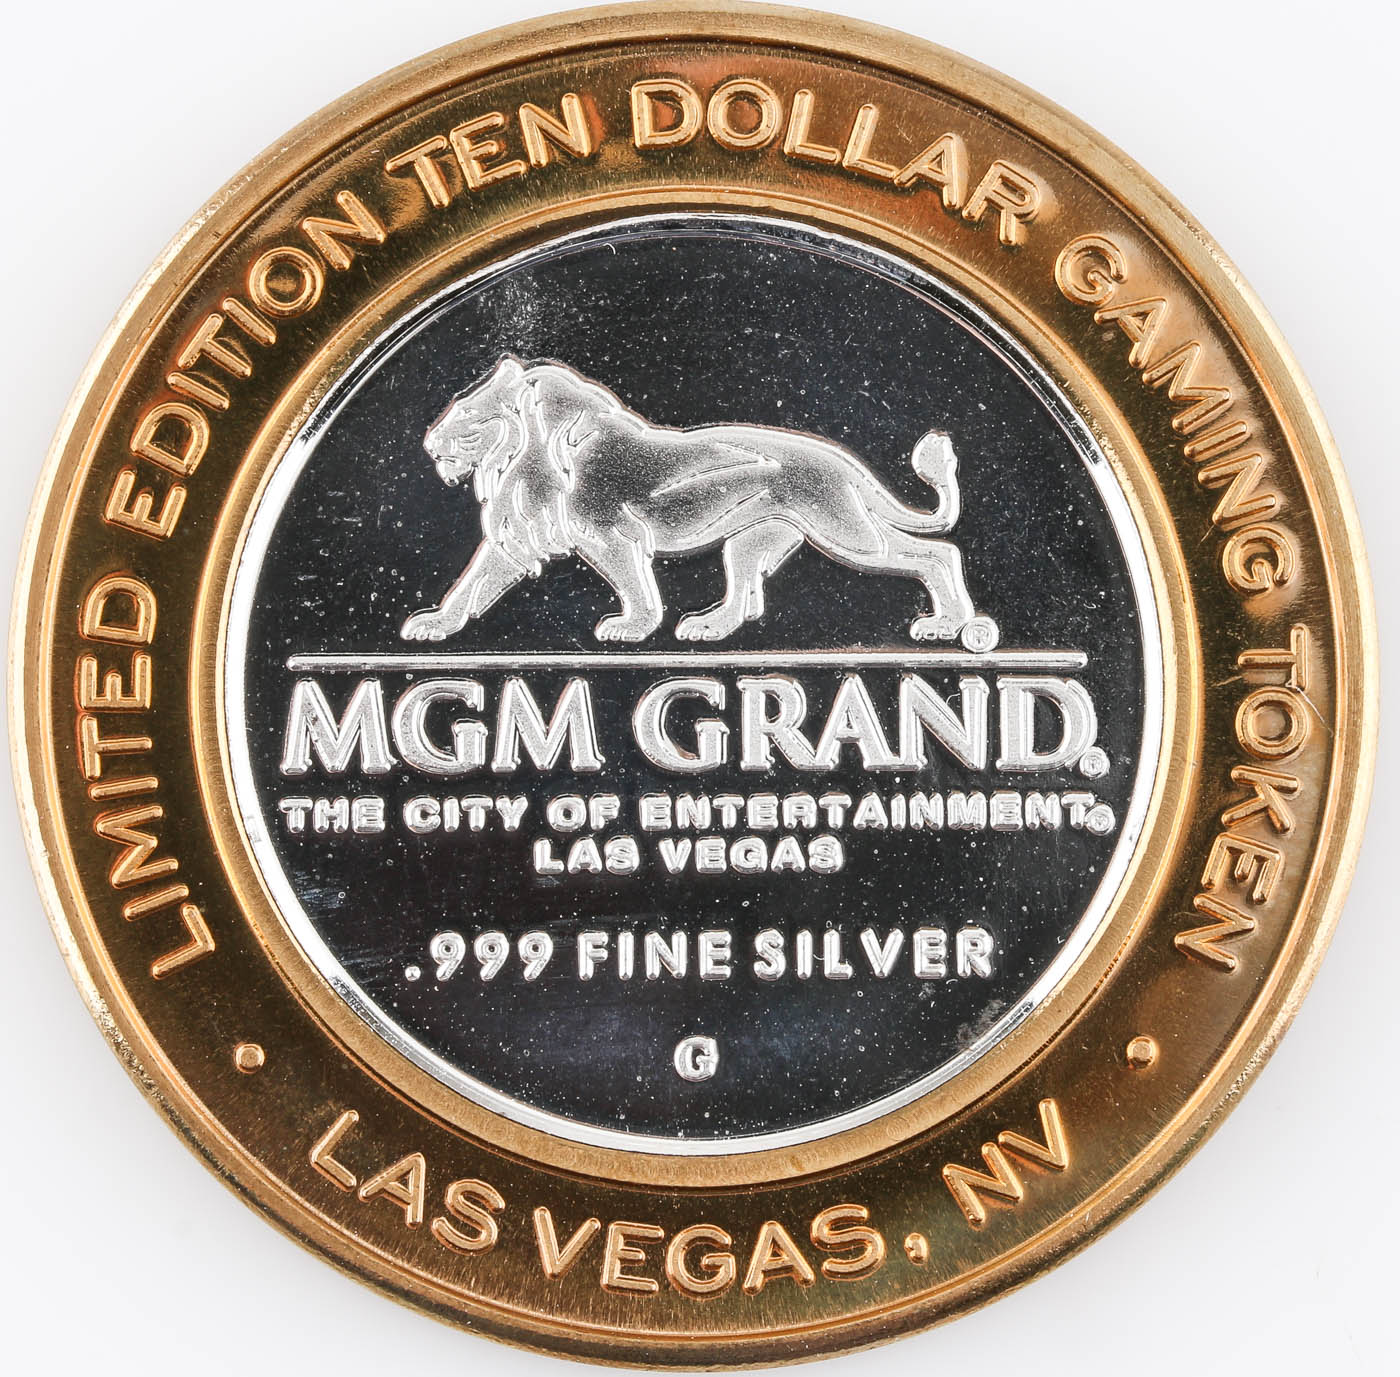 does mgm grand have online casino gaming